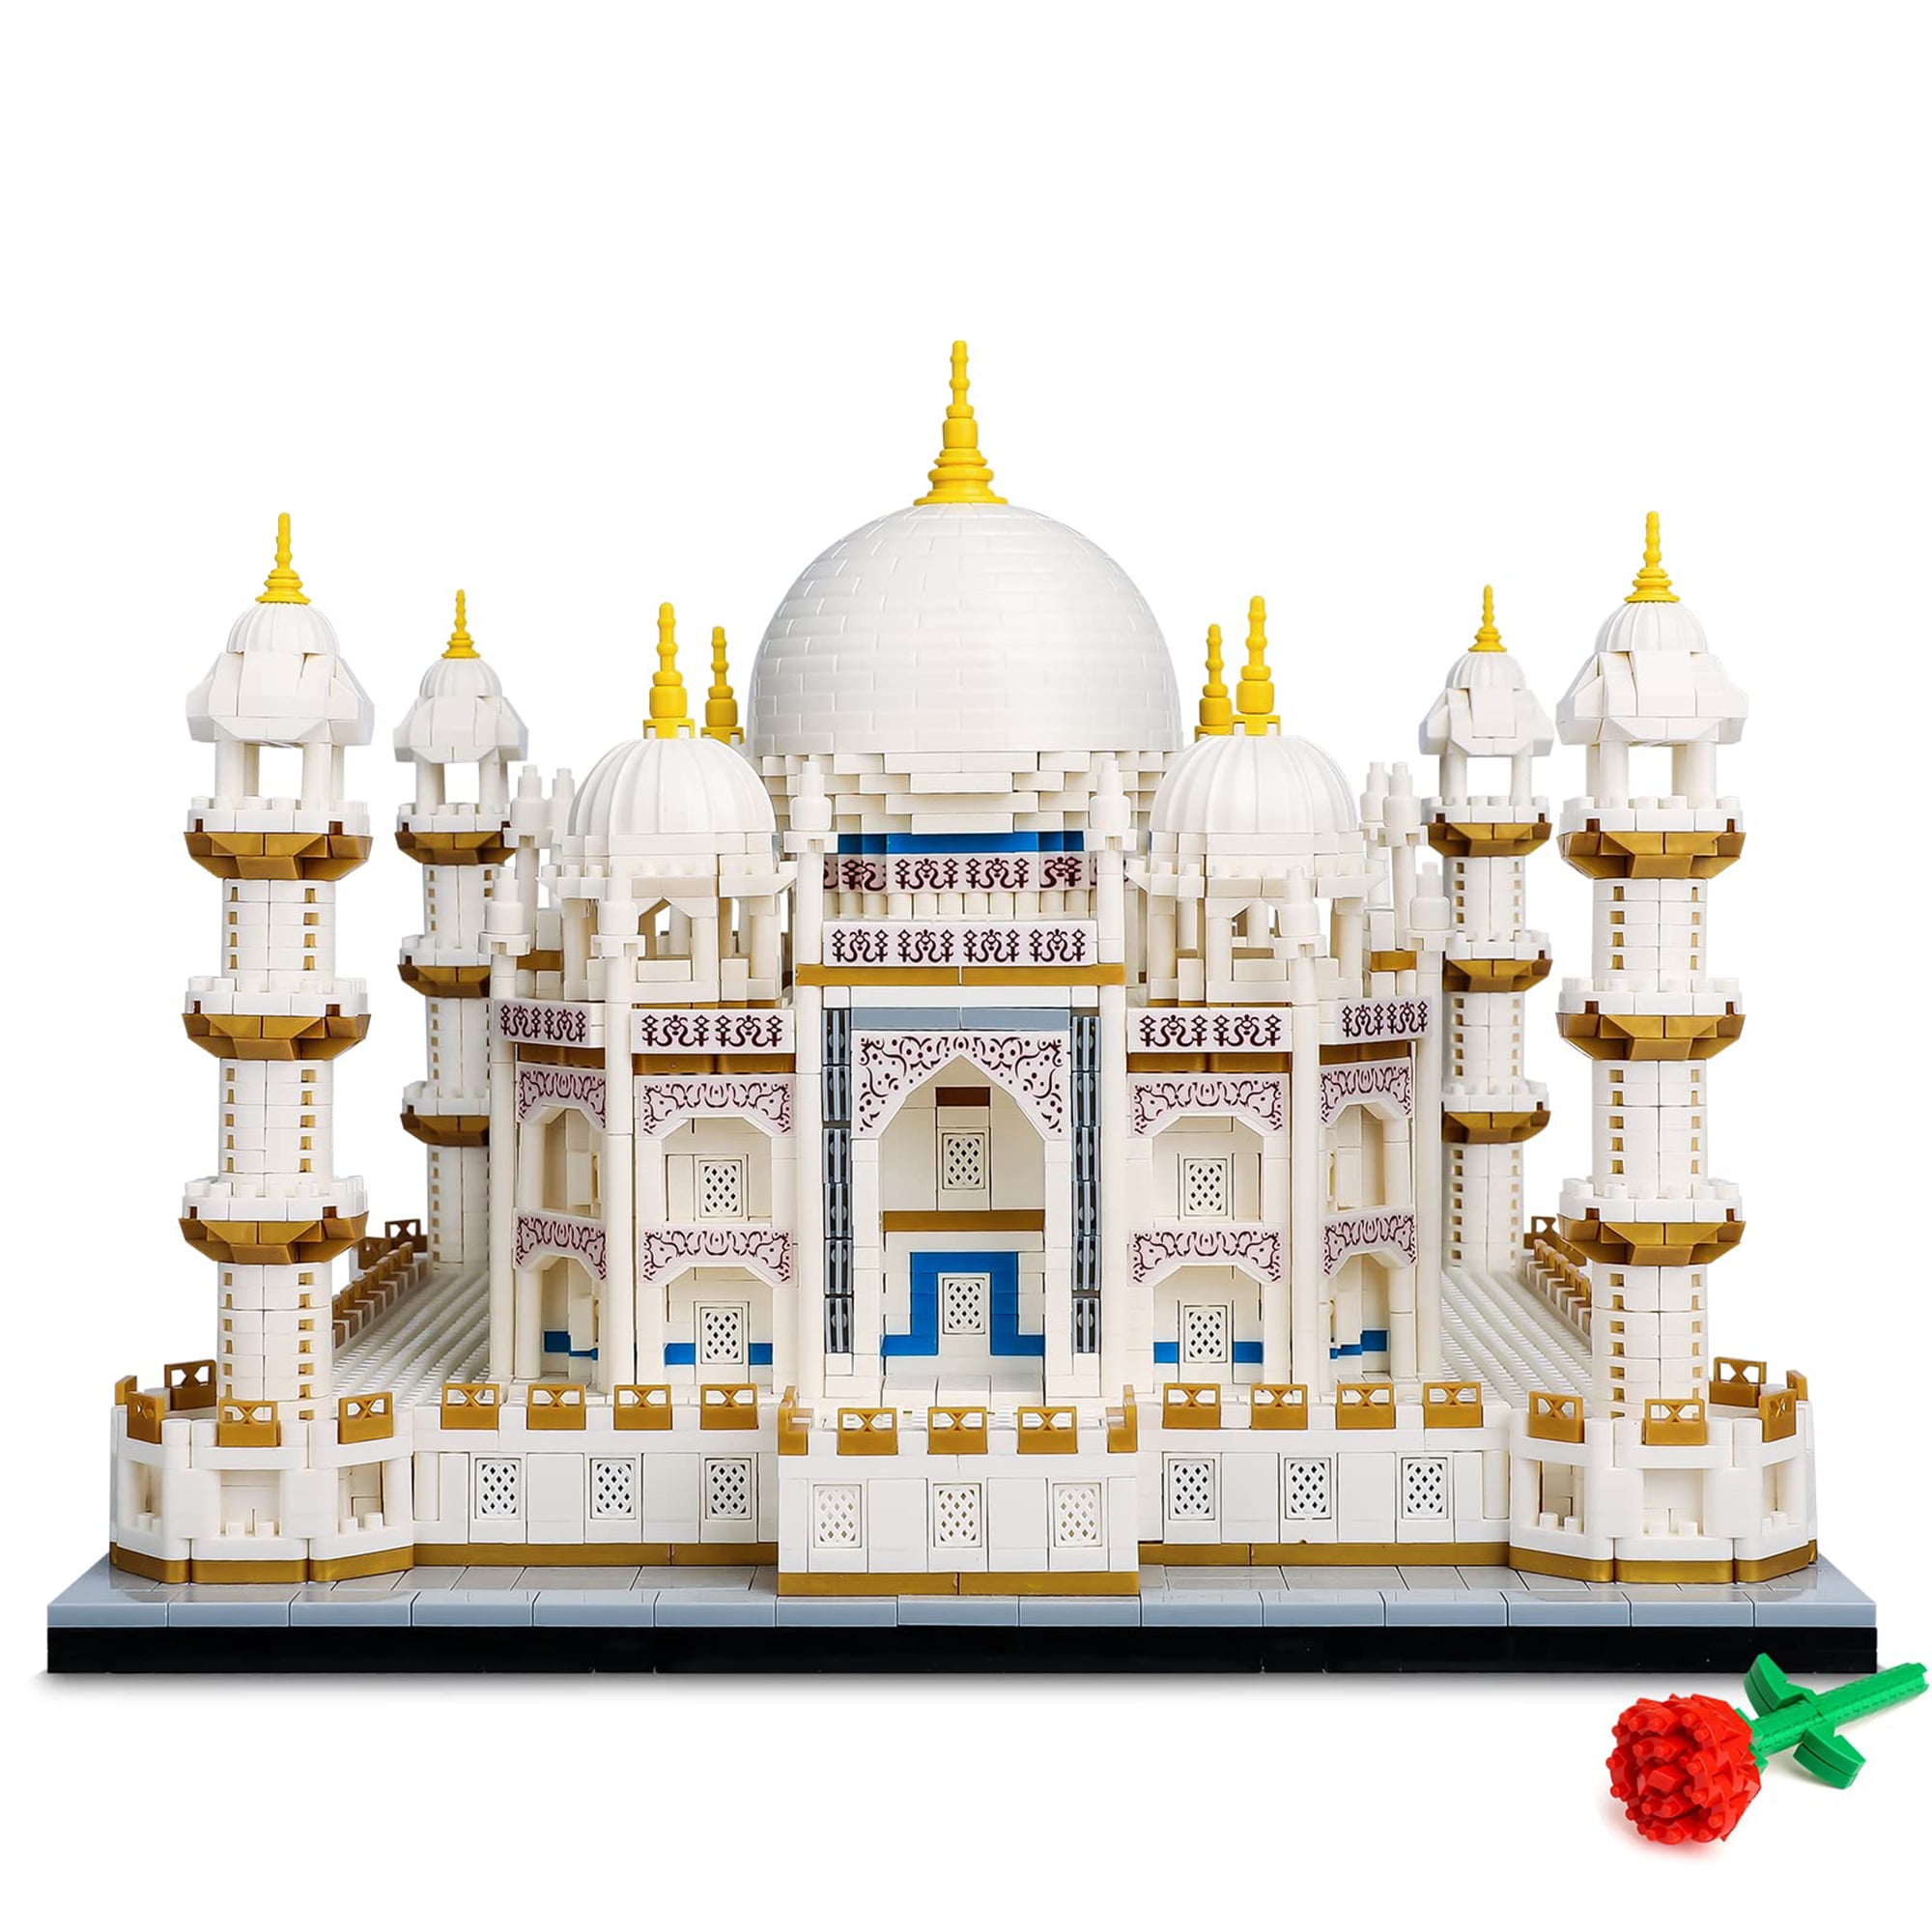  LEGO Architecture Taj Mahal 21056 Building Set - Landmarks  Collection, Display Model, Collectible Home Décor Gift Idea and Model Kits  for Adults and Architects to Build : Toys & Games